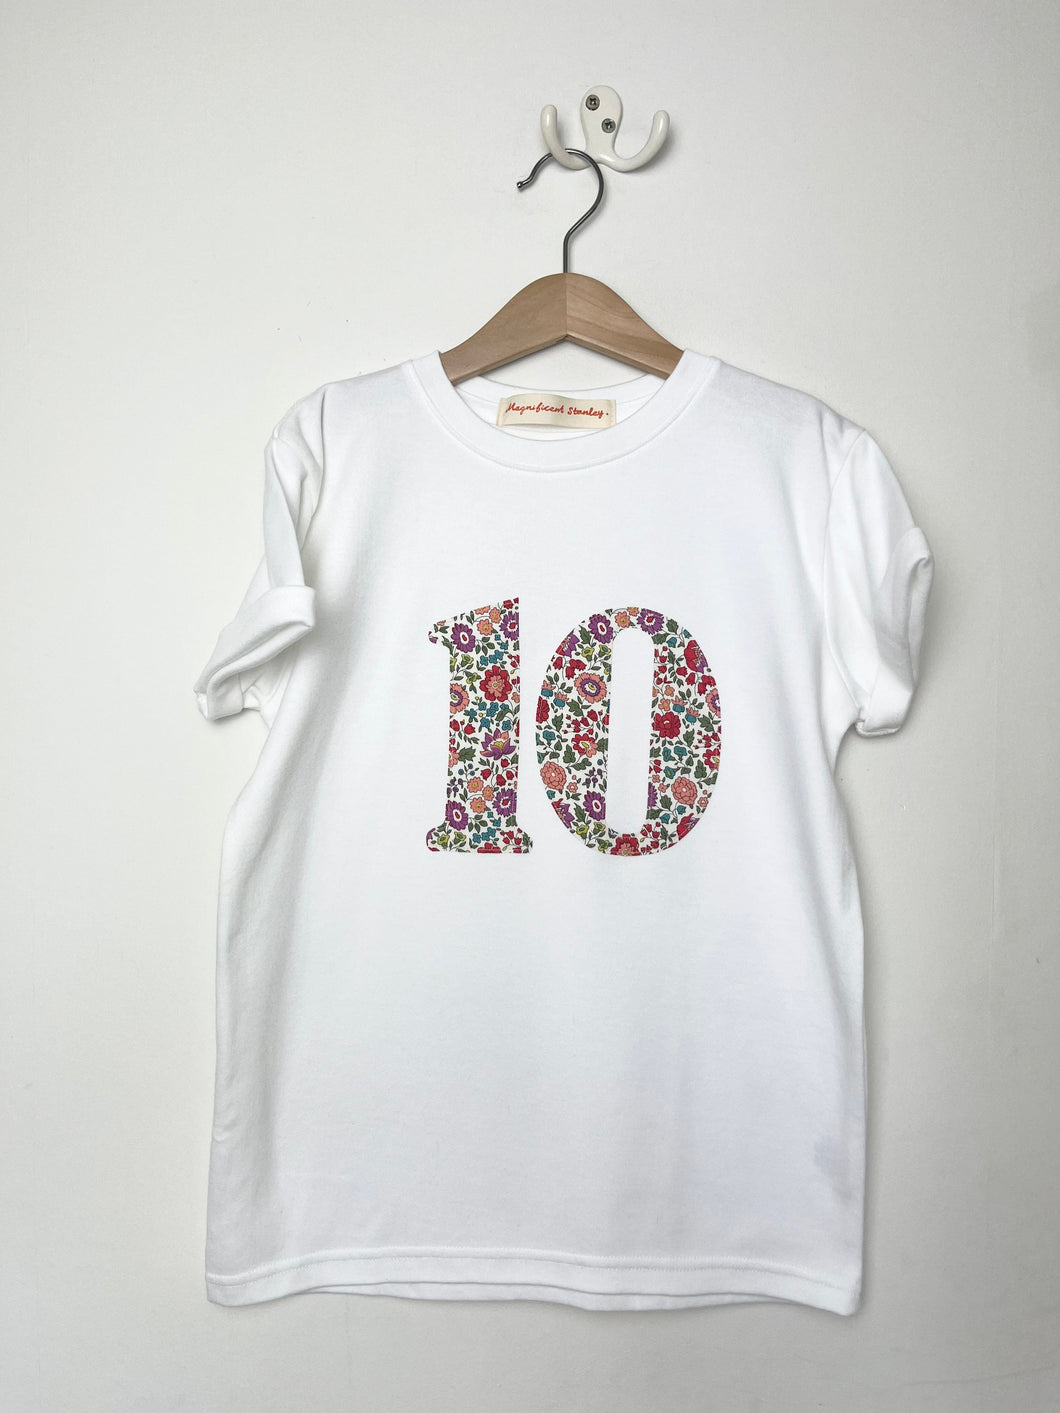 Magnificent Stanley '10' D'Anjo White S/S Tee 7-8yrs